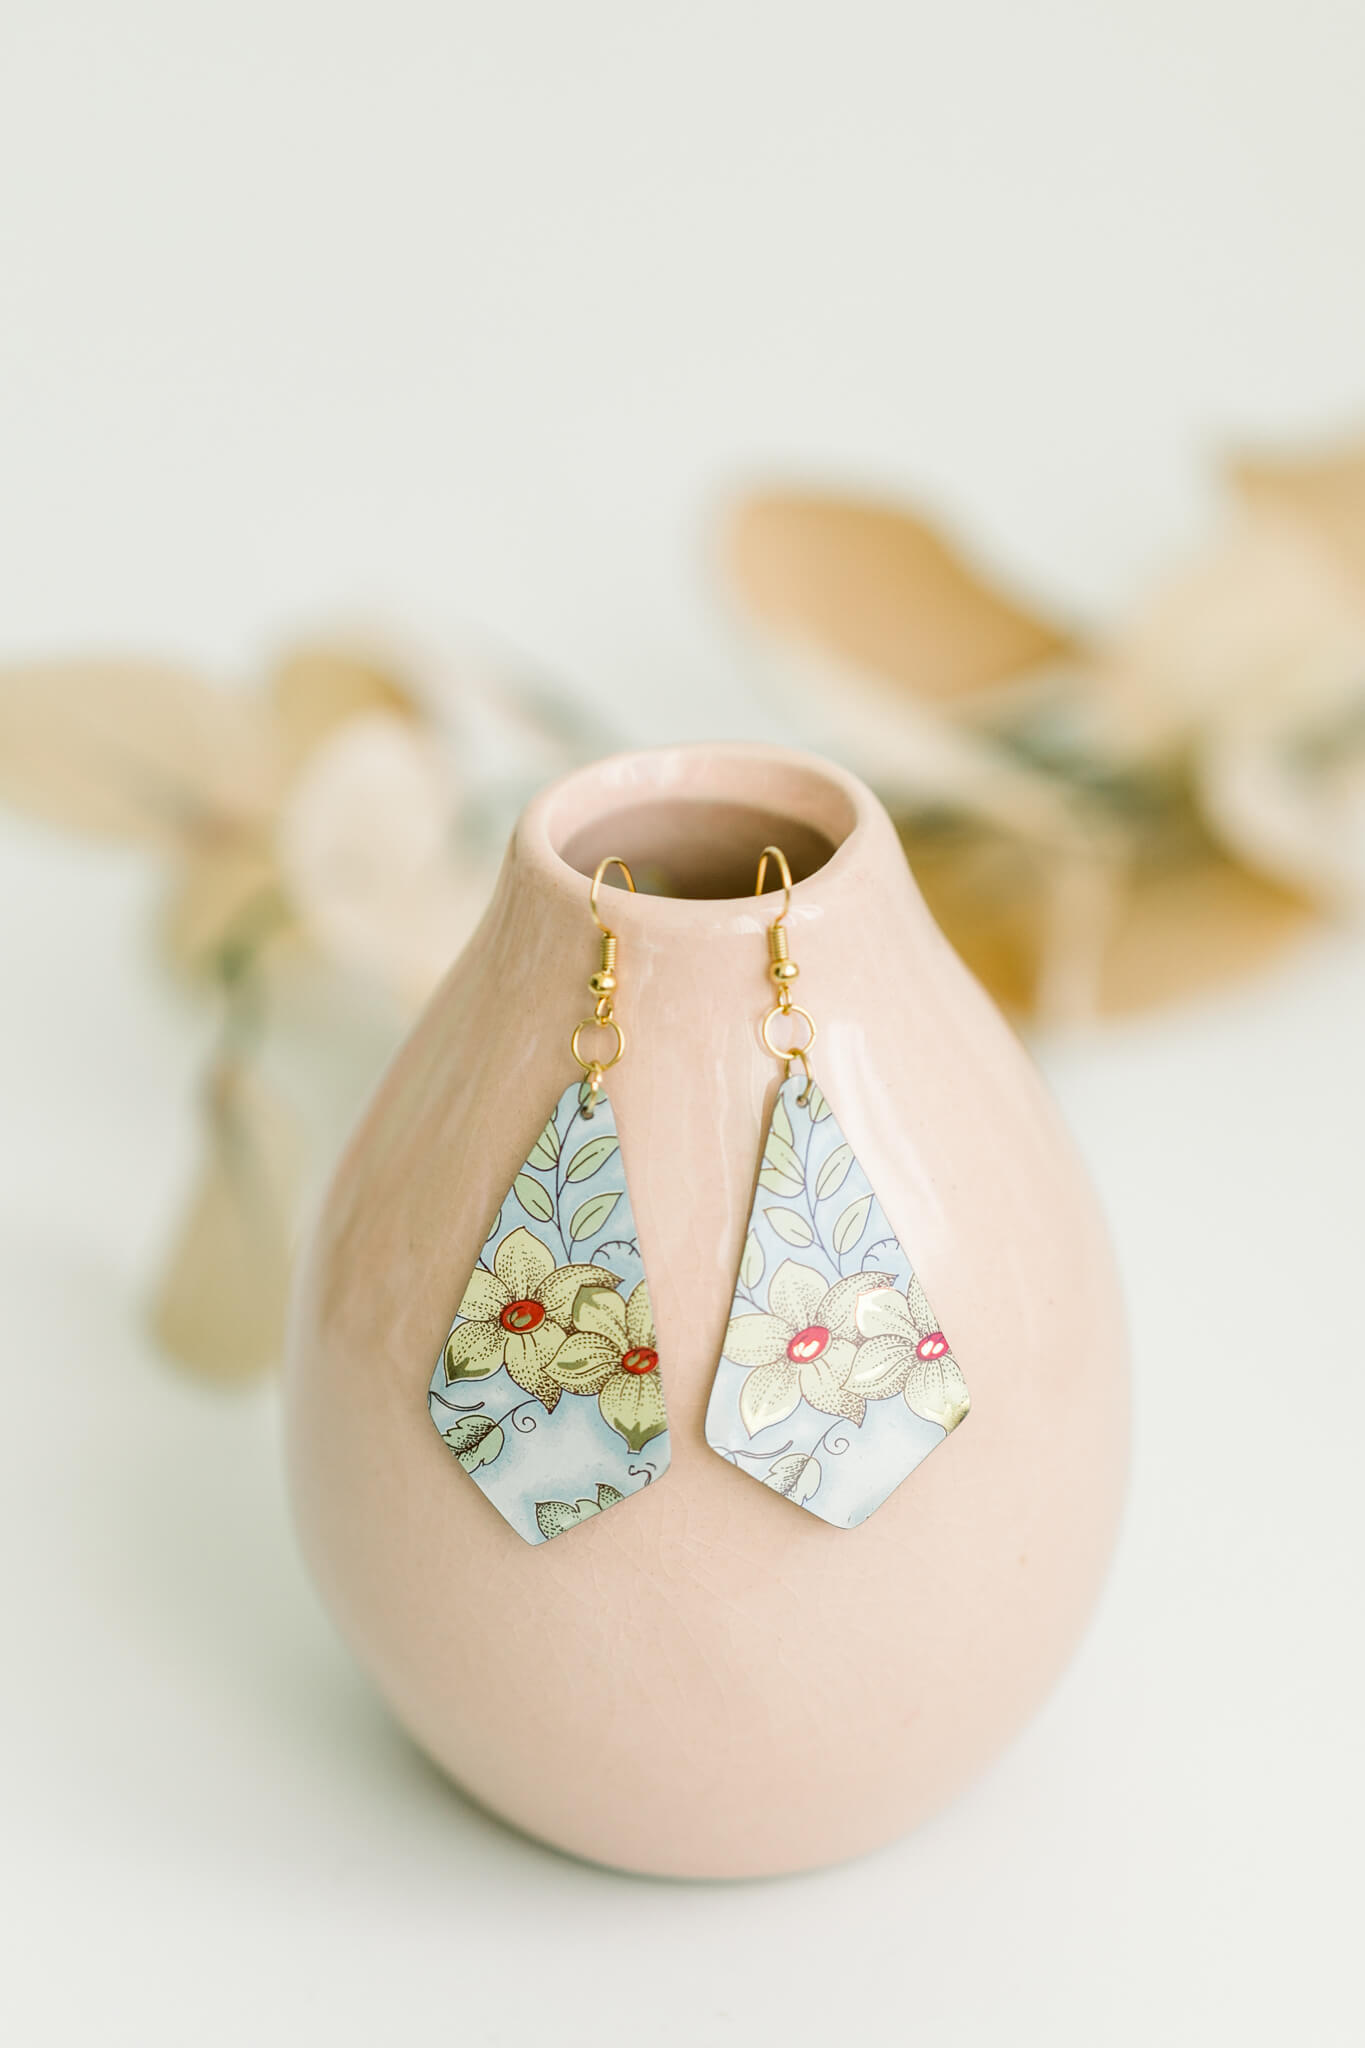 Drop earrings made from a vintage tin  by jewelry designer Amy Gates.